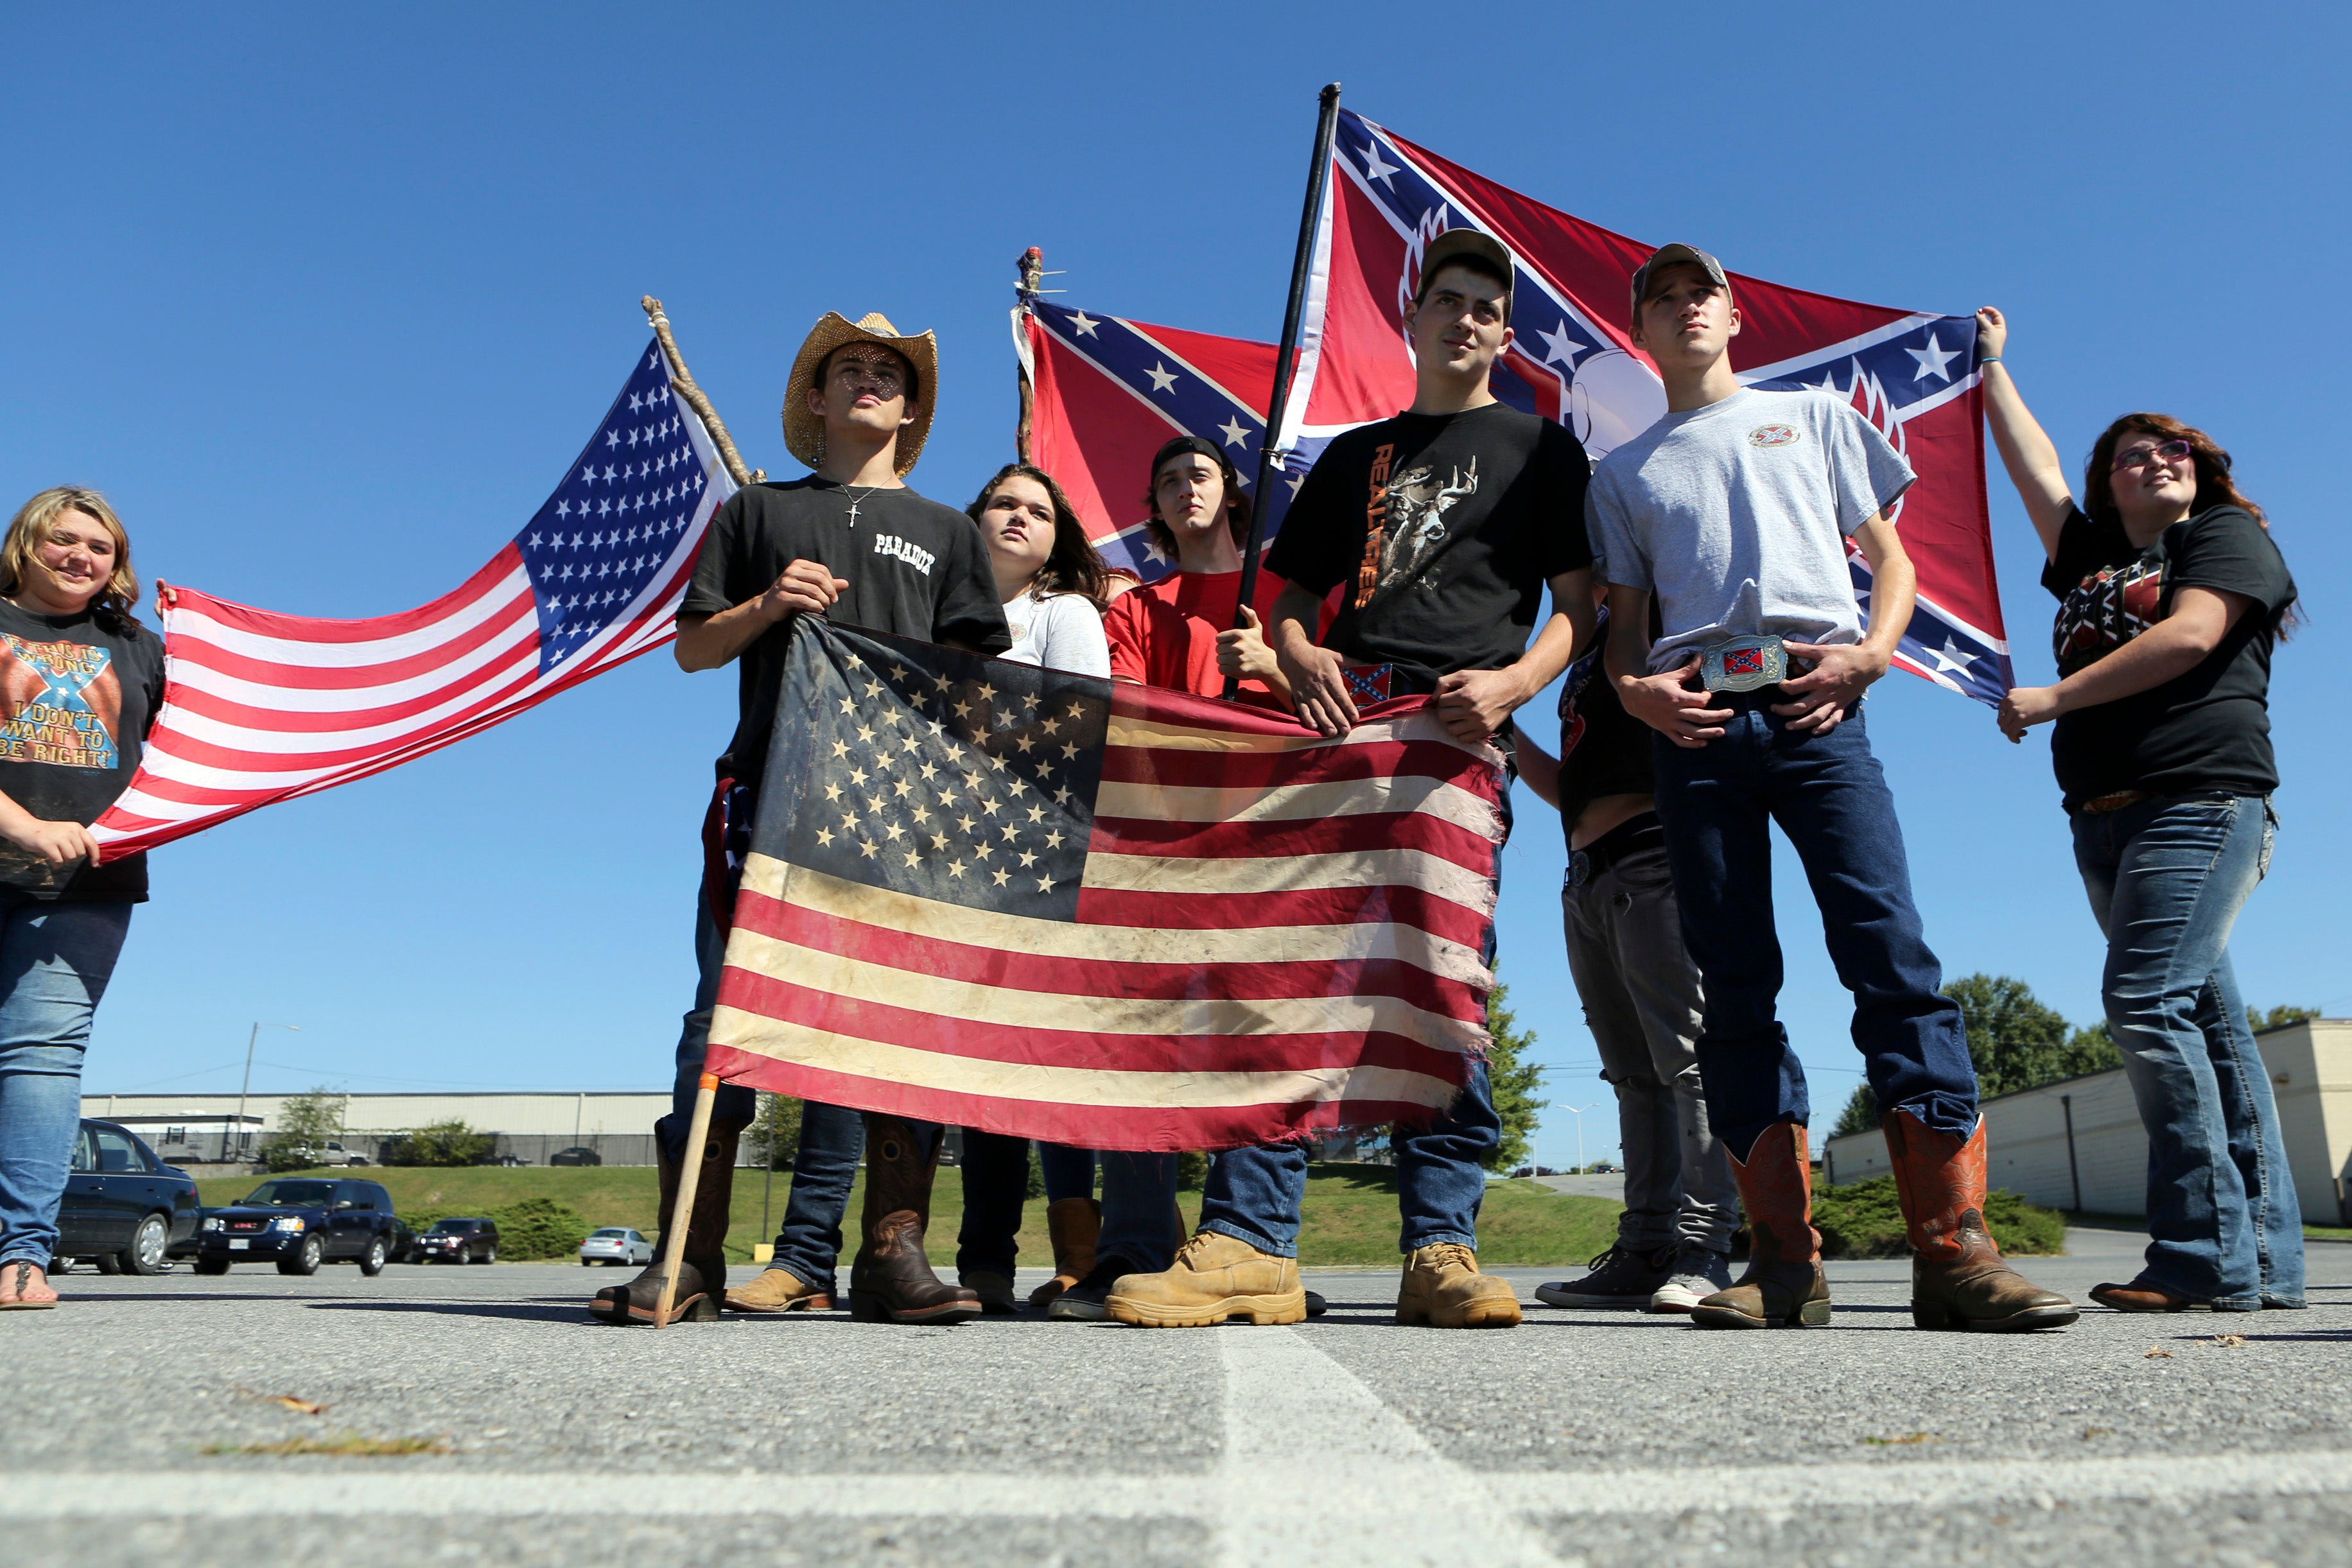 Students from Christiansburg High School protesting over the right to show the Confederate flag